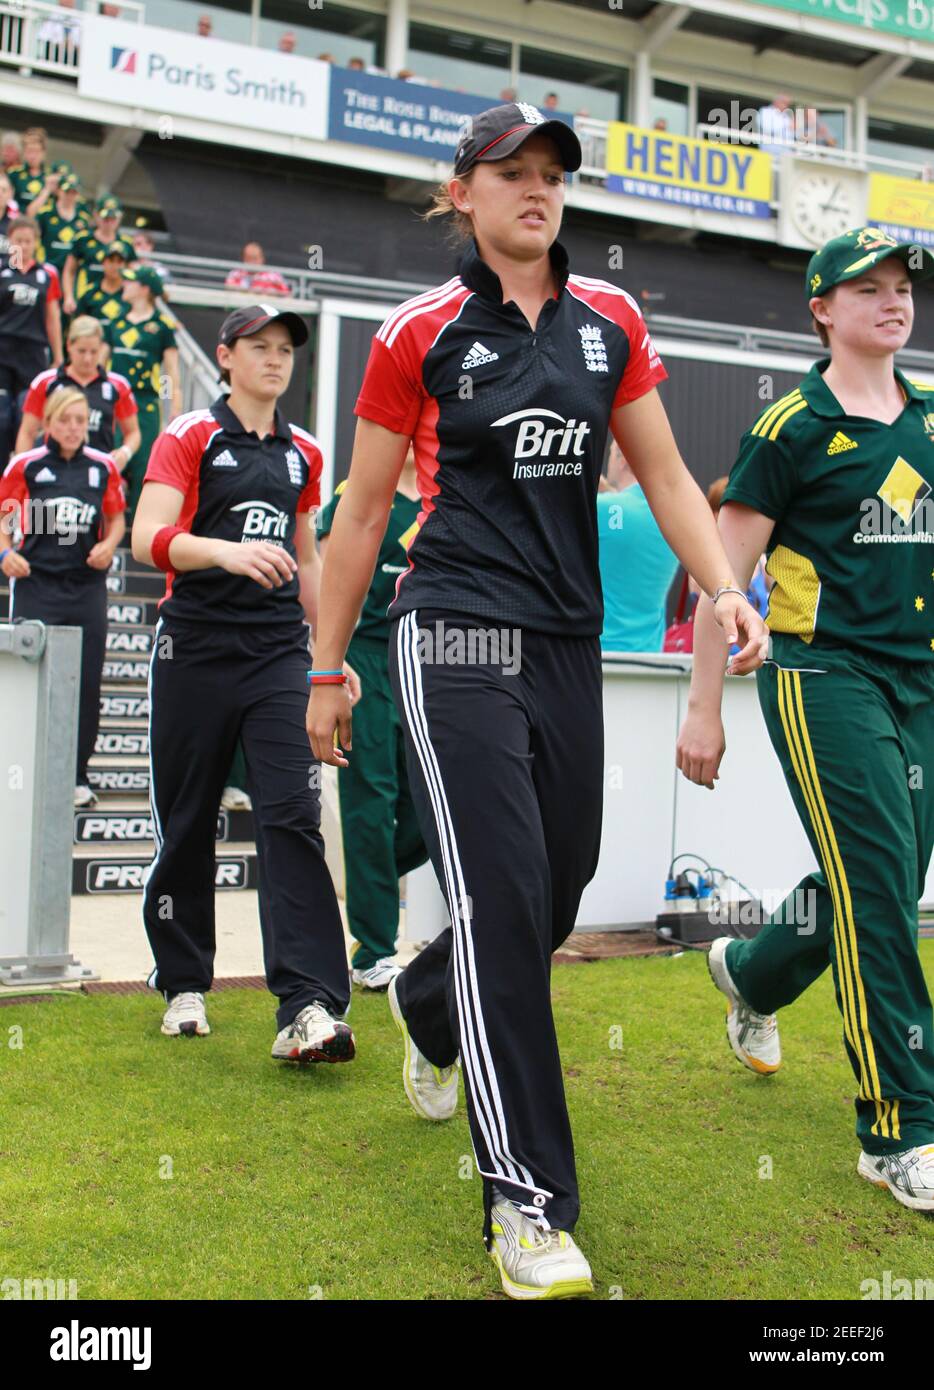 Cricket - England v Australia NatWest Women's T20 Series Final - The Rose  Bowl, Hampshire - 27/6/11 England's Sarah Taylor walks on to the pitch  Mandatory Credit: Action Images / Steven Paston Stock Photo - Alamy